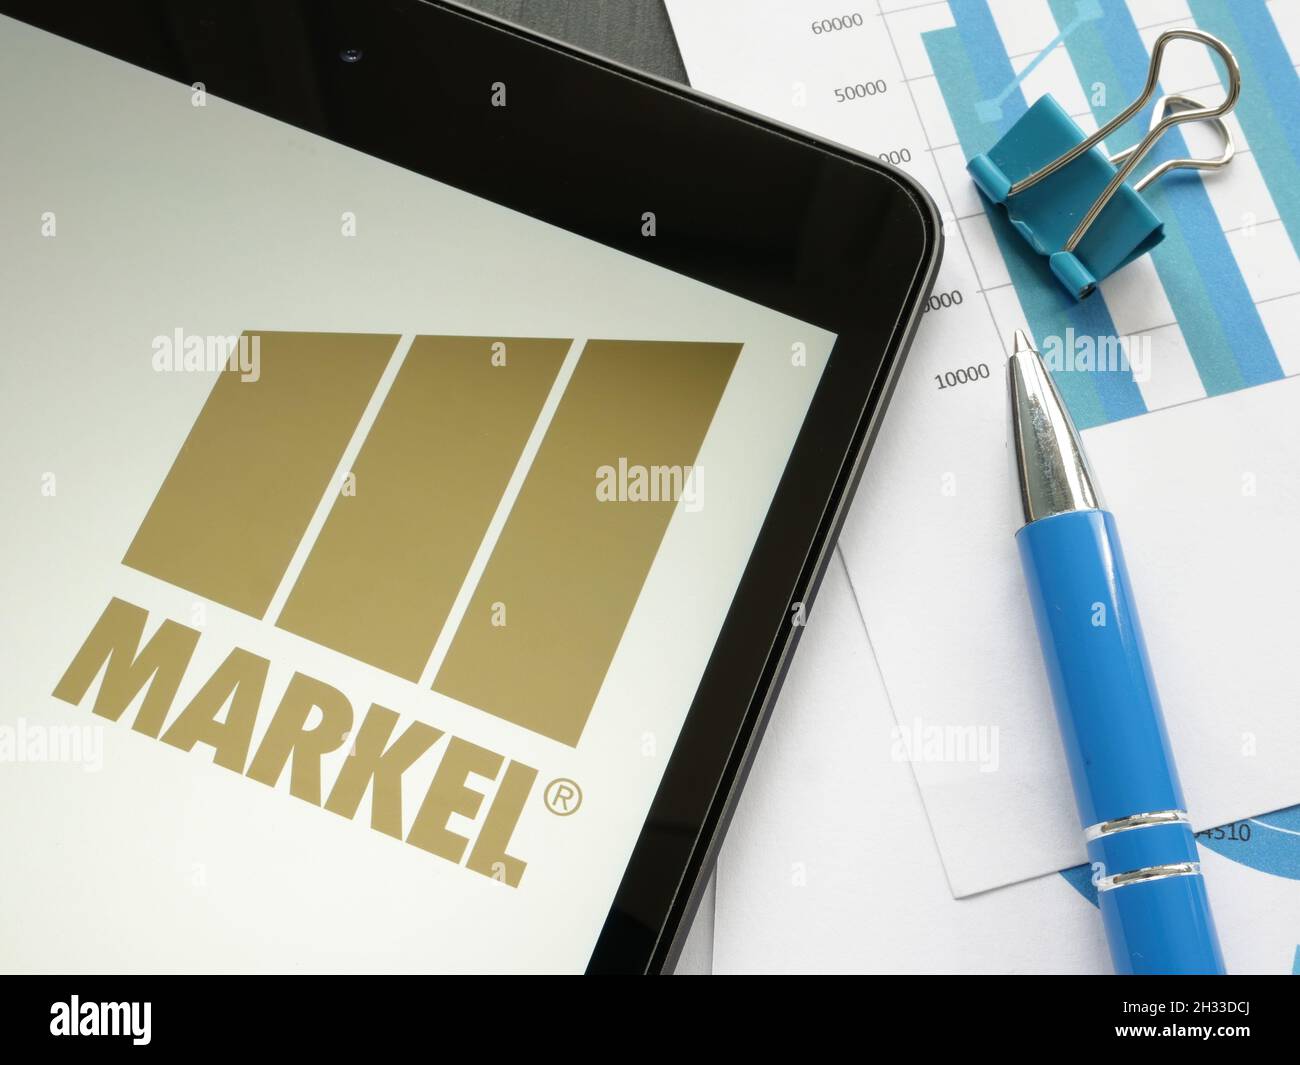 KYIV, UKRAINE - October 21, 2021. Markel Corporation logo on the screen and papers. Stock Photo